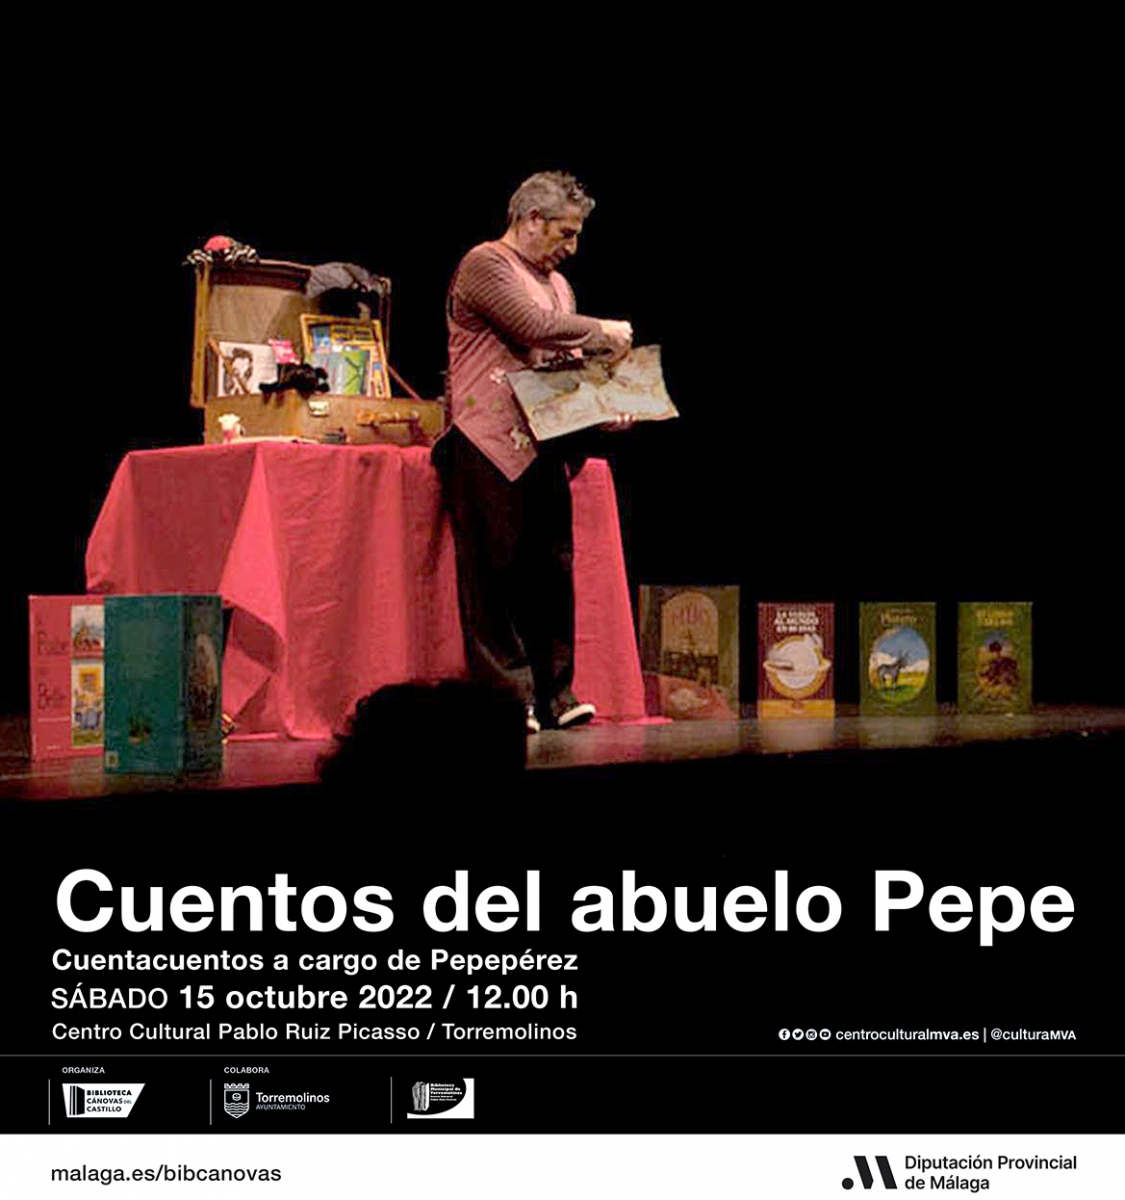 20221011111130_events_986_cuentos-abuelo-pepe-redes.jpg